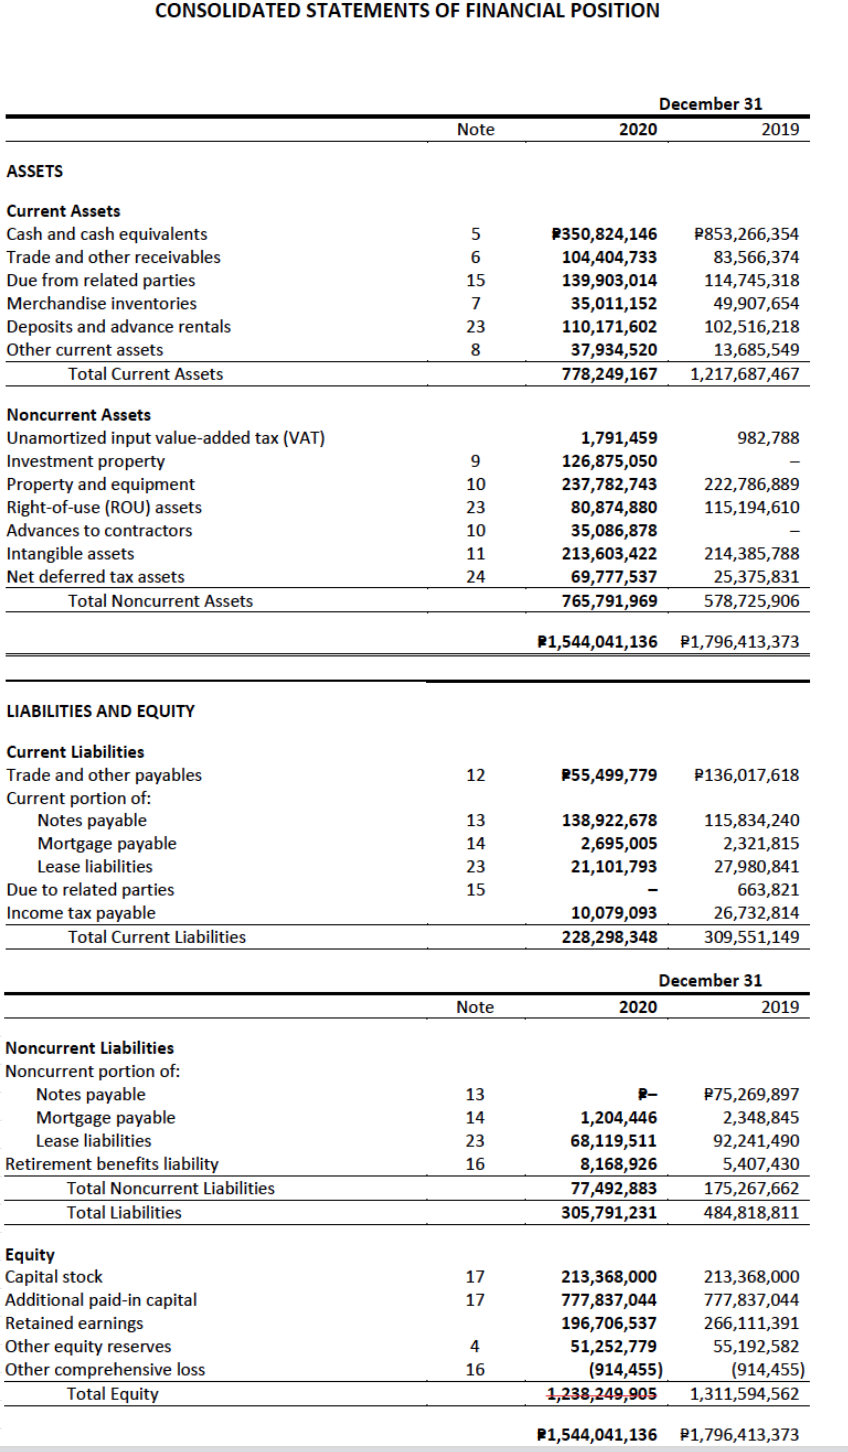 CONSOLIDATED STATEMENTS OF FINANCIAL POSITION
December 31
Note
2020
2019
ASSETS
Current Assets
Cash and cash equivalents
P350,824,146
P853,266,354
Trade and other receivables
104,404,733
83,566,374
Due from related parties
15
114,745,318
139,903,014
35,011,152
110,171,602
37,934,520
778,249,167
Merchandise inventories
49,907,654
Deposits and advance rentals
Other current assets
102,516,218
13,685,549
23
8
Total Current Assets
1,217,687,467
Noncurrent Assets
Unamortized input value-added tax (VAT)
Investment property
Property and equipment
Right-of-use (ROU) assets
1,791,459
126,875,050
237,782,743
982,788
222,786,889
115,194,610
10
23
80,874,880
35,086,878
213,603,422
69,777,537
Advances to contractors
10
Intangible assets
11
214,385,788
Net deferred tax assets
24
25,375,831
Total Noncurrent Assets
765,791,969
578,725,906
P1,544,041,136
P1,796,413,373
LIABILITIES AND EQUITY
Current Liabilities
Trade and other payables
Current portion of:
Notes payable
Mortgage payable
12
P55,499,779
P136,017,618
138,922,678
2,695,005
21,101,793
13
115,834,240
14
2,321,815
Lease liabilities
23
27,980,841
Due to related parties
Income tax payable
15
663,821
10,079,093
228,298,348
26,732,814
Total Current Liabilities
309,551,149
December 31
Note
2020
2019
Noncurrent Liabilities
Noncurrent portion of:
Notes payable
Mortgage payable
Lease liabilities
13
R-
P75,269,897
14
1,204,446
68,119,511
8,168,926
77,492,883
305,791,231
2,348,845
23
92,241,490
Retirement benefits liability
16
5,407,430
Total Noncurrent Liabilities
175,267,662
Total Liabilities
484,818,811
Equity
Capital stock
Additional paid-in capital
Retained earnings
Other equity reserves
Other comprehensive loss
17
213,368,000
777,837,044
213,368,000
17
777,837,044
196,706,537
266,111,391
4
51,252,779
55,192,582
(914,455)
1,238,249,905
16
(914,455)
Total Equity
1,311,594,562
P1,544,041,136 P1,796,413,373
